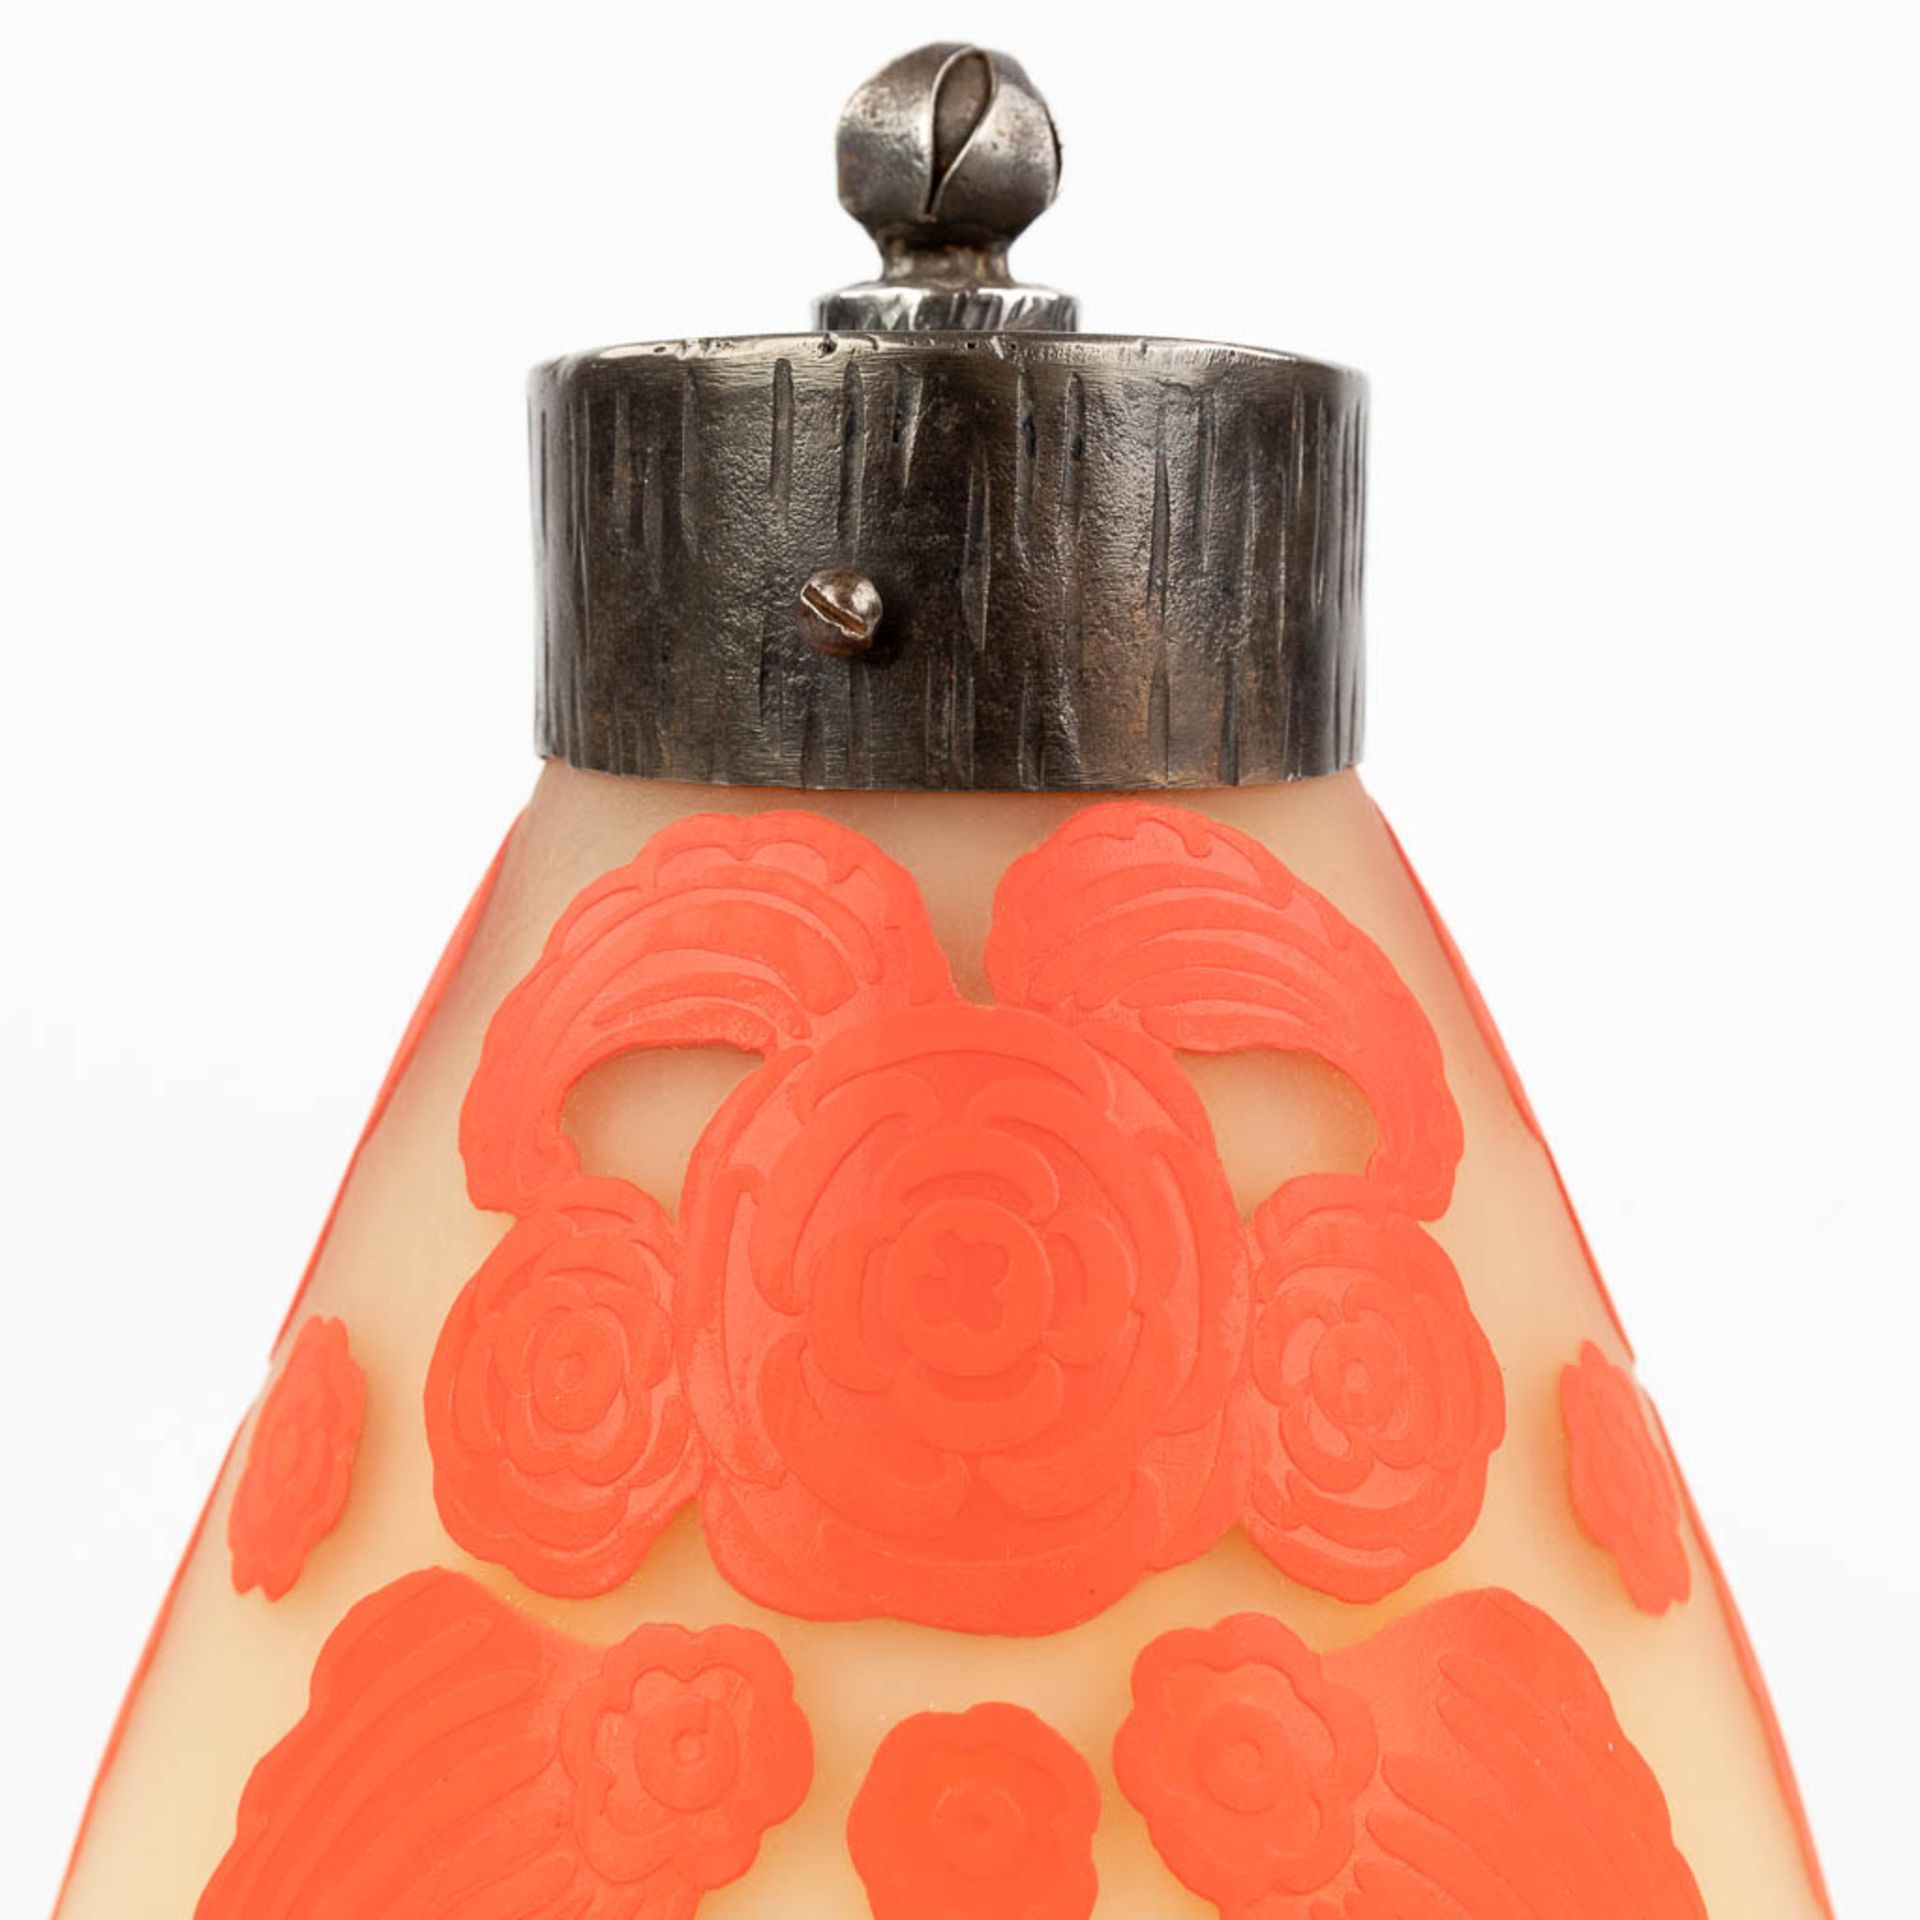 An exceptional 'Veilleuse' table lamp, marked Muller Frres LunŽville. (H:24 x D:17 cm) - Image 10 of 12